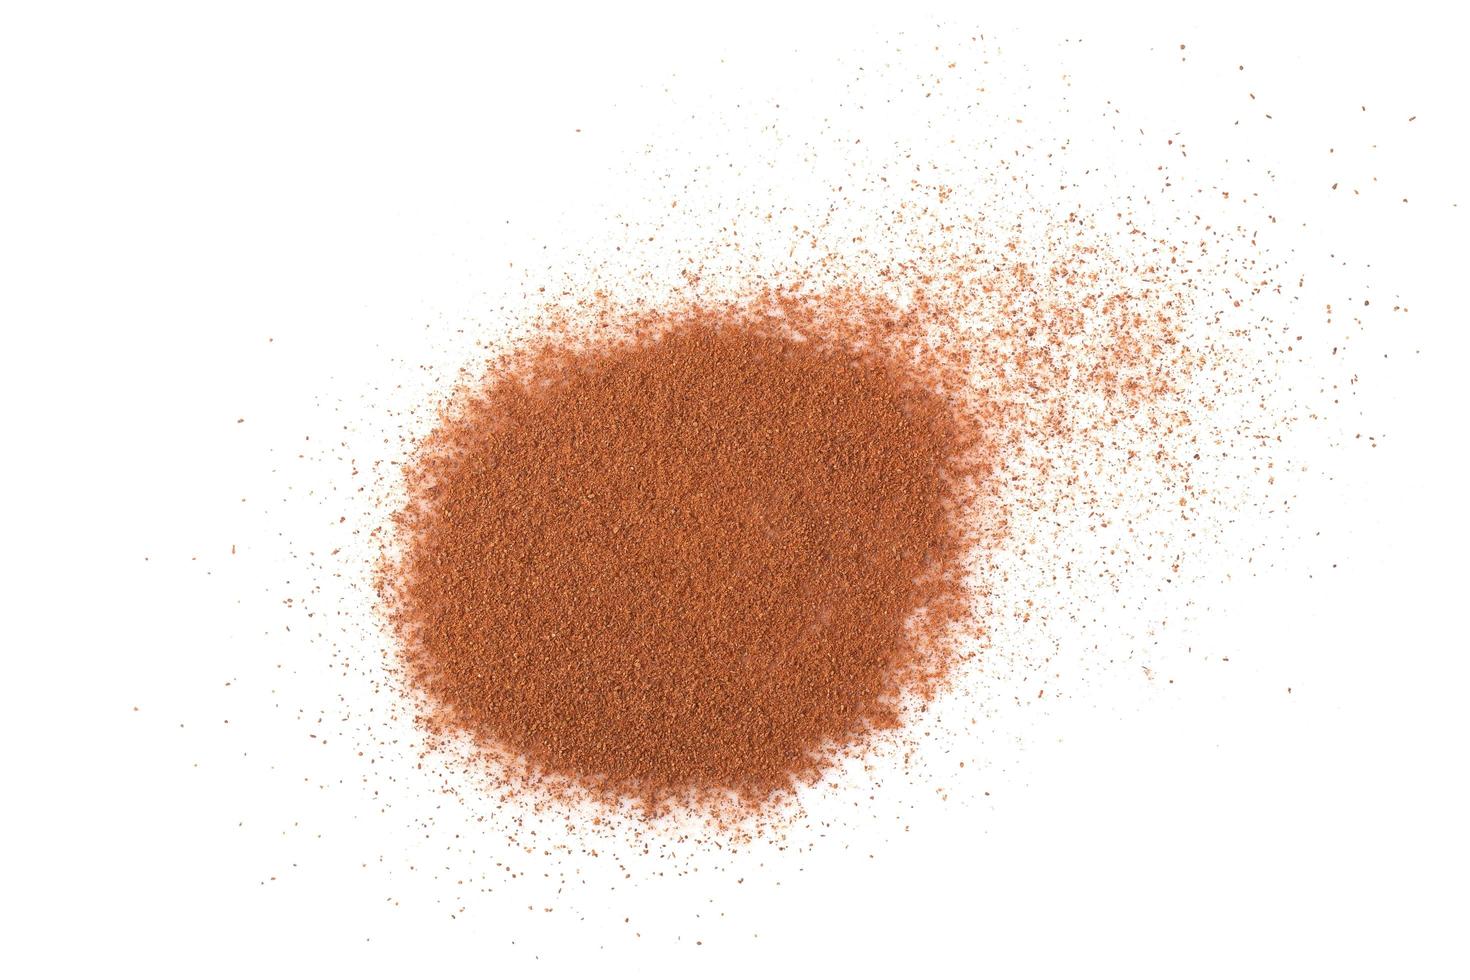 Pile cinnamon powder isolated on white background with top view photo